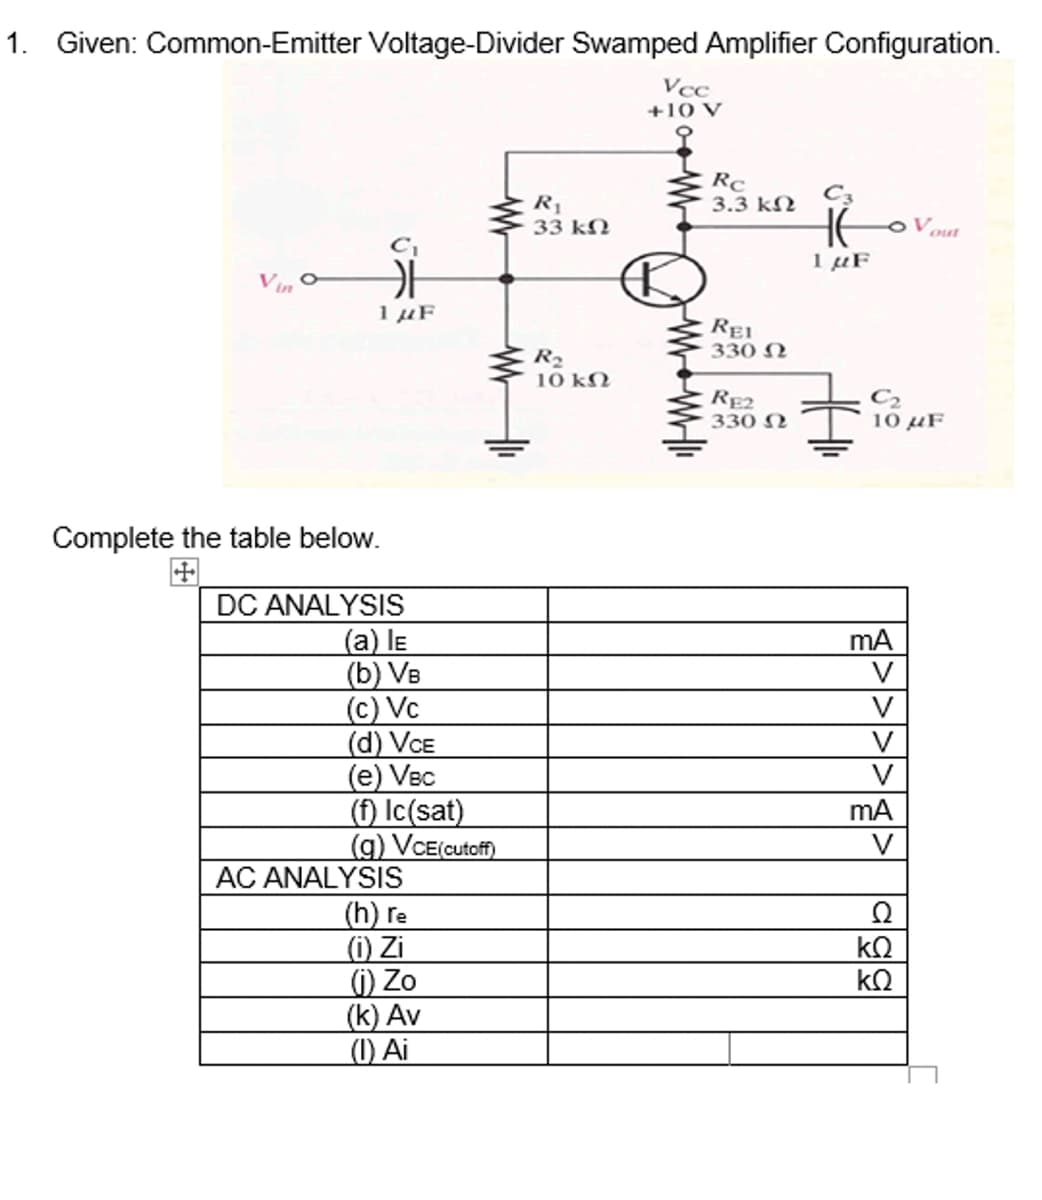 1. Given: Common-Emitter Voltage-Divider Swamped Amplifier Configuration.
Vcc
+10 V
Rc
3.3 kN
C3
R1
33 kN
out
1 µF
1 µF
Rei
330 N
R2
10 kN
RE2
330 N
10 µF
Complete the table below.
田
DC ANALYSIS
(a) lE
(b) Vв
(c) Vc
(d) VCE
(e) Vec
(f) Ic(sat)
(g) VCE(cutoff)
mA
V
V
V
V
AC ANALYSIS
(h) re
(i) Zi
(1) Zo
(k) Av
(1) Ai
Ω
